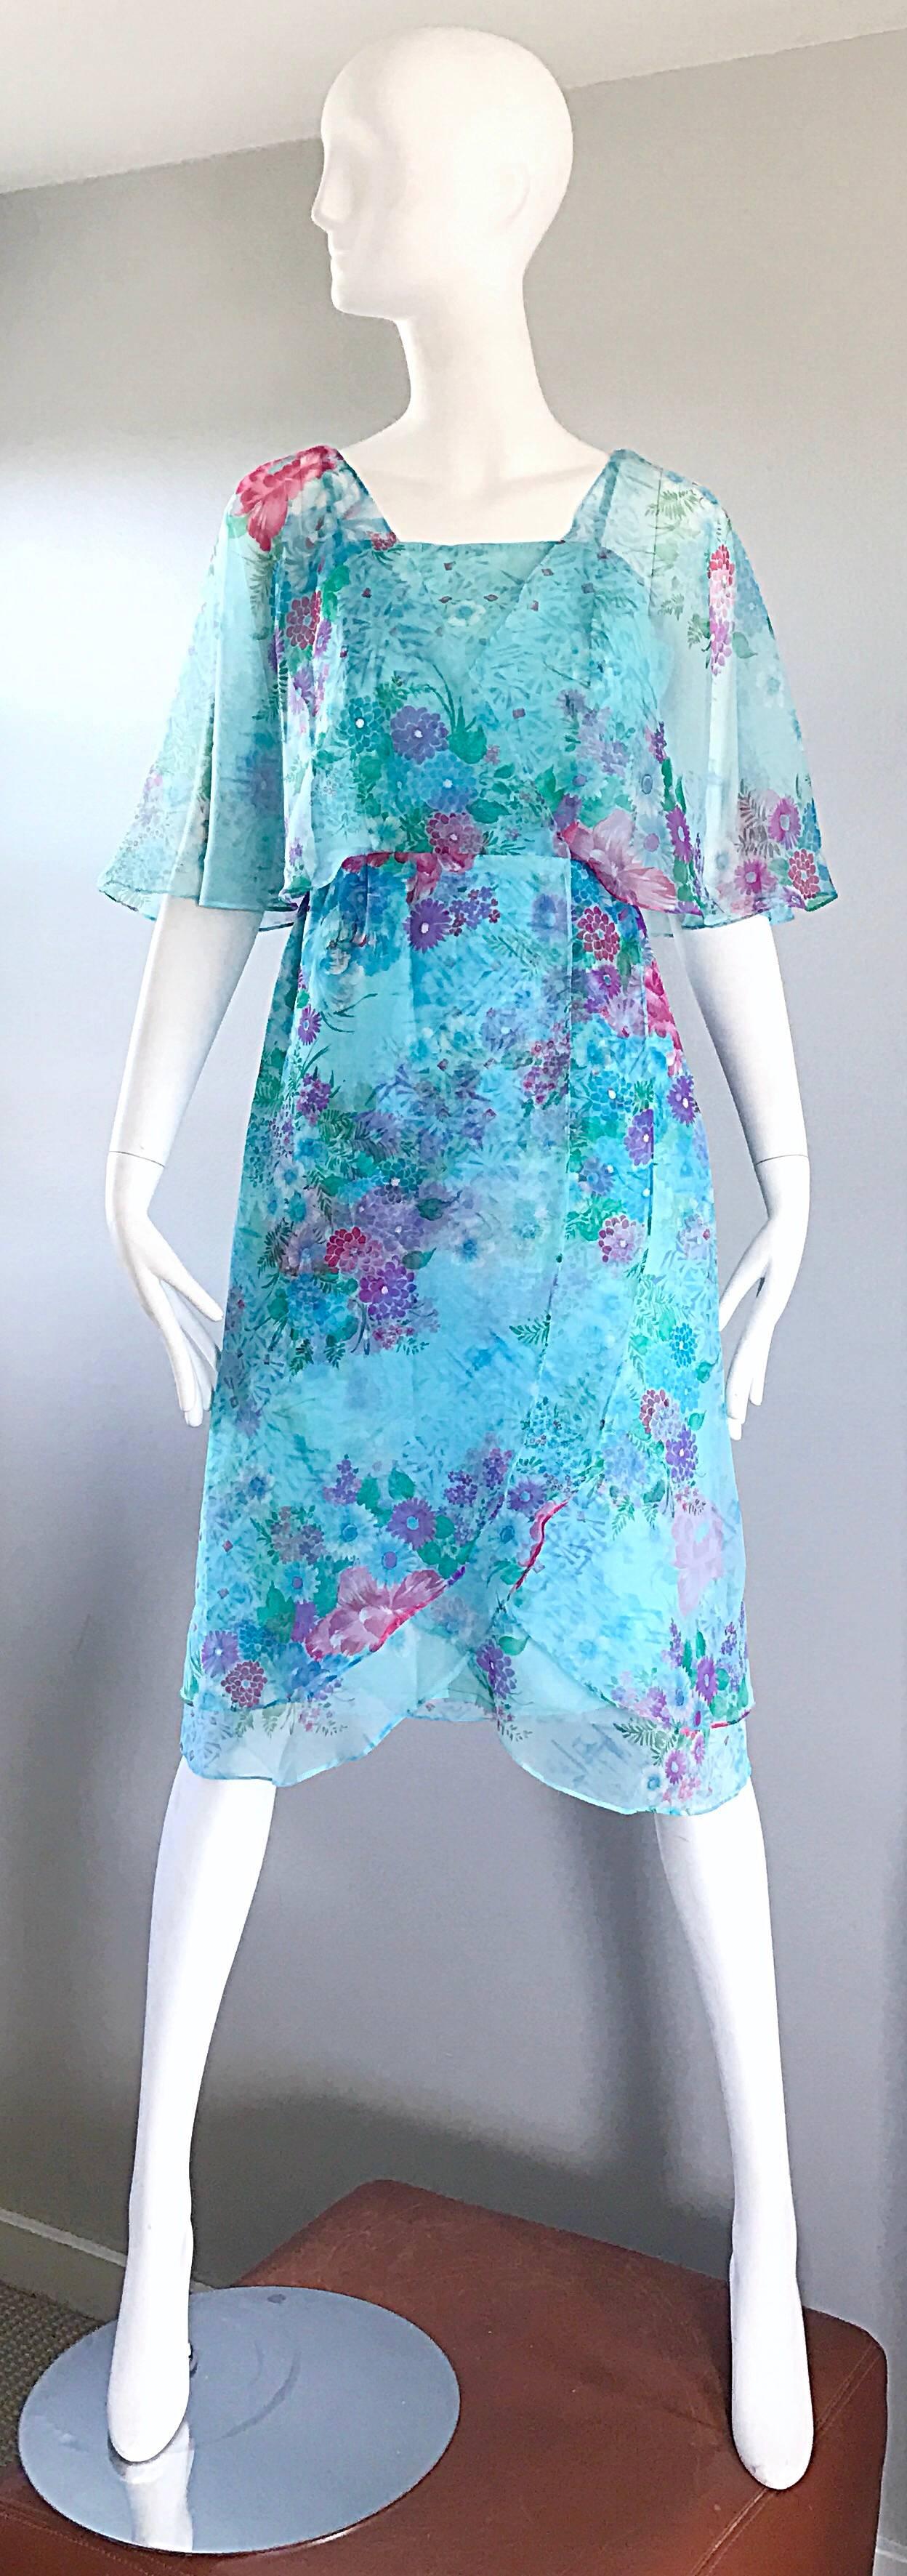 Gorgeous 1970s JANE ANDRES for GUMPS OF SAN FRANCISCO blue chiffon boho flower dress! Flirty and fun, with a beautiful floral print throughout. Vibrant blue, with bright pops of purple, pink and green flowers throughout. Flowy chiffon sleeves. Full